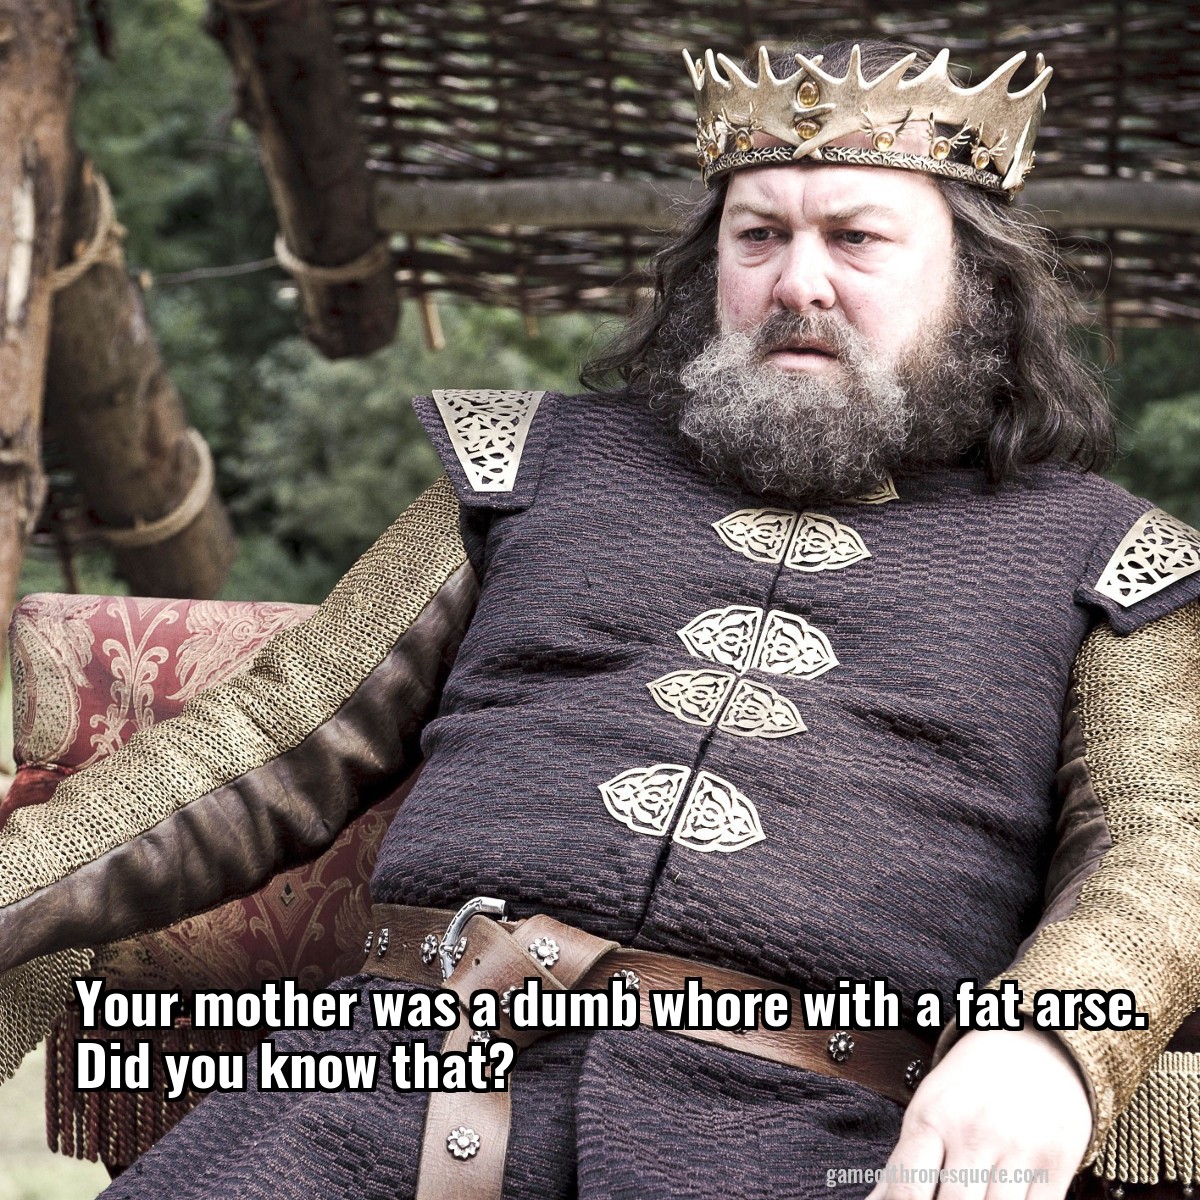 Your mother was a dumb whore with a fat arse. Did you know that?